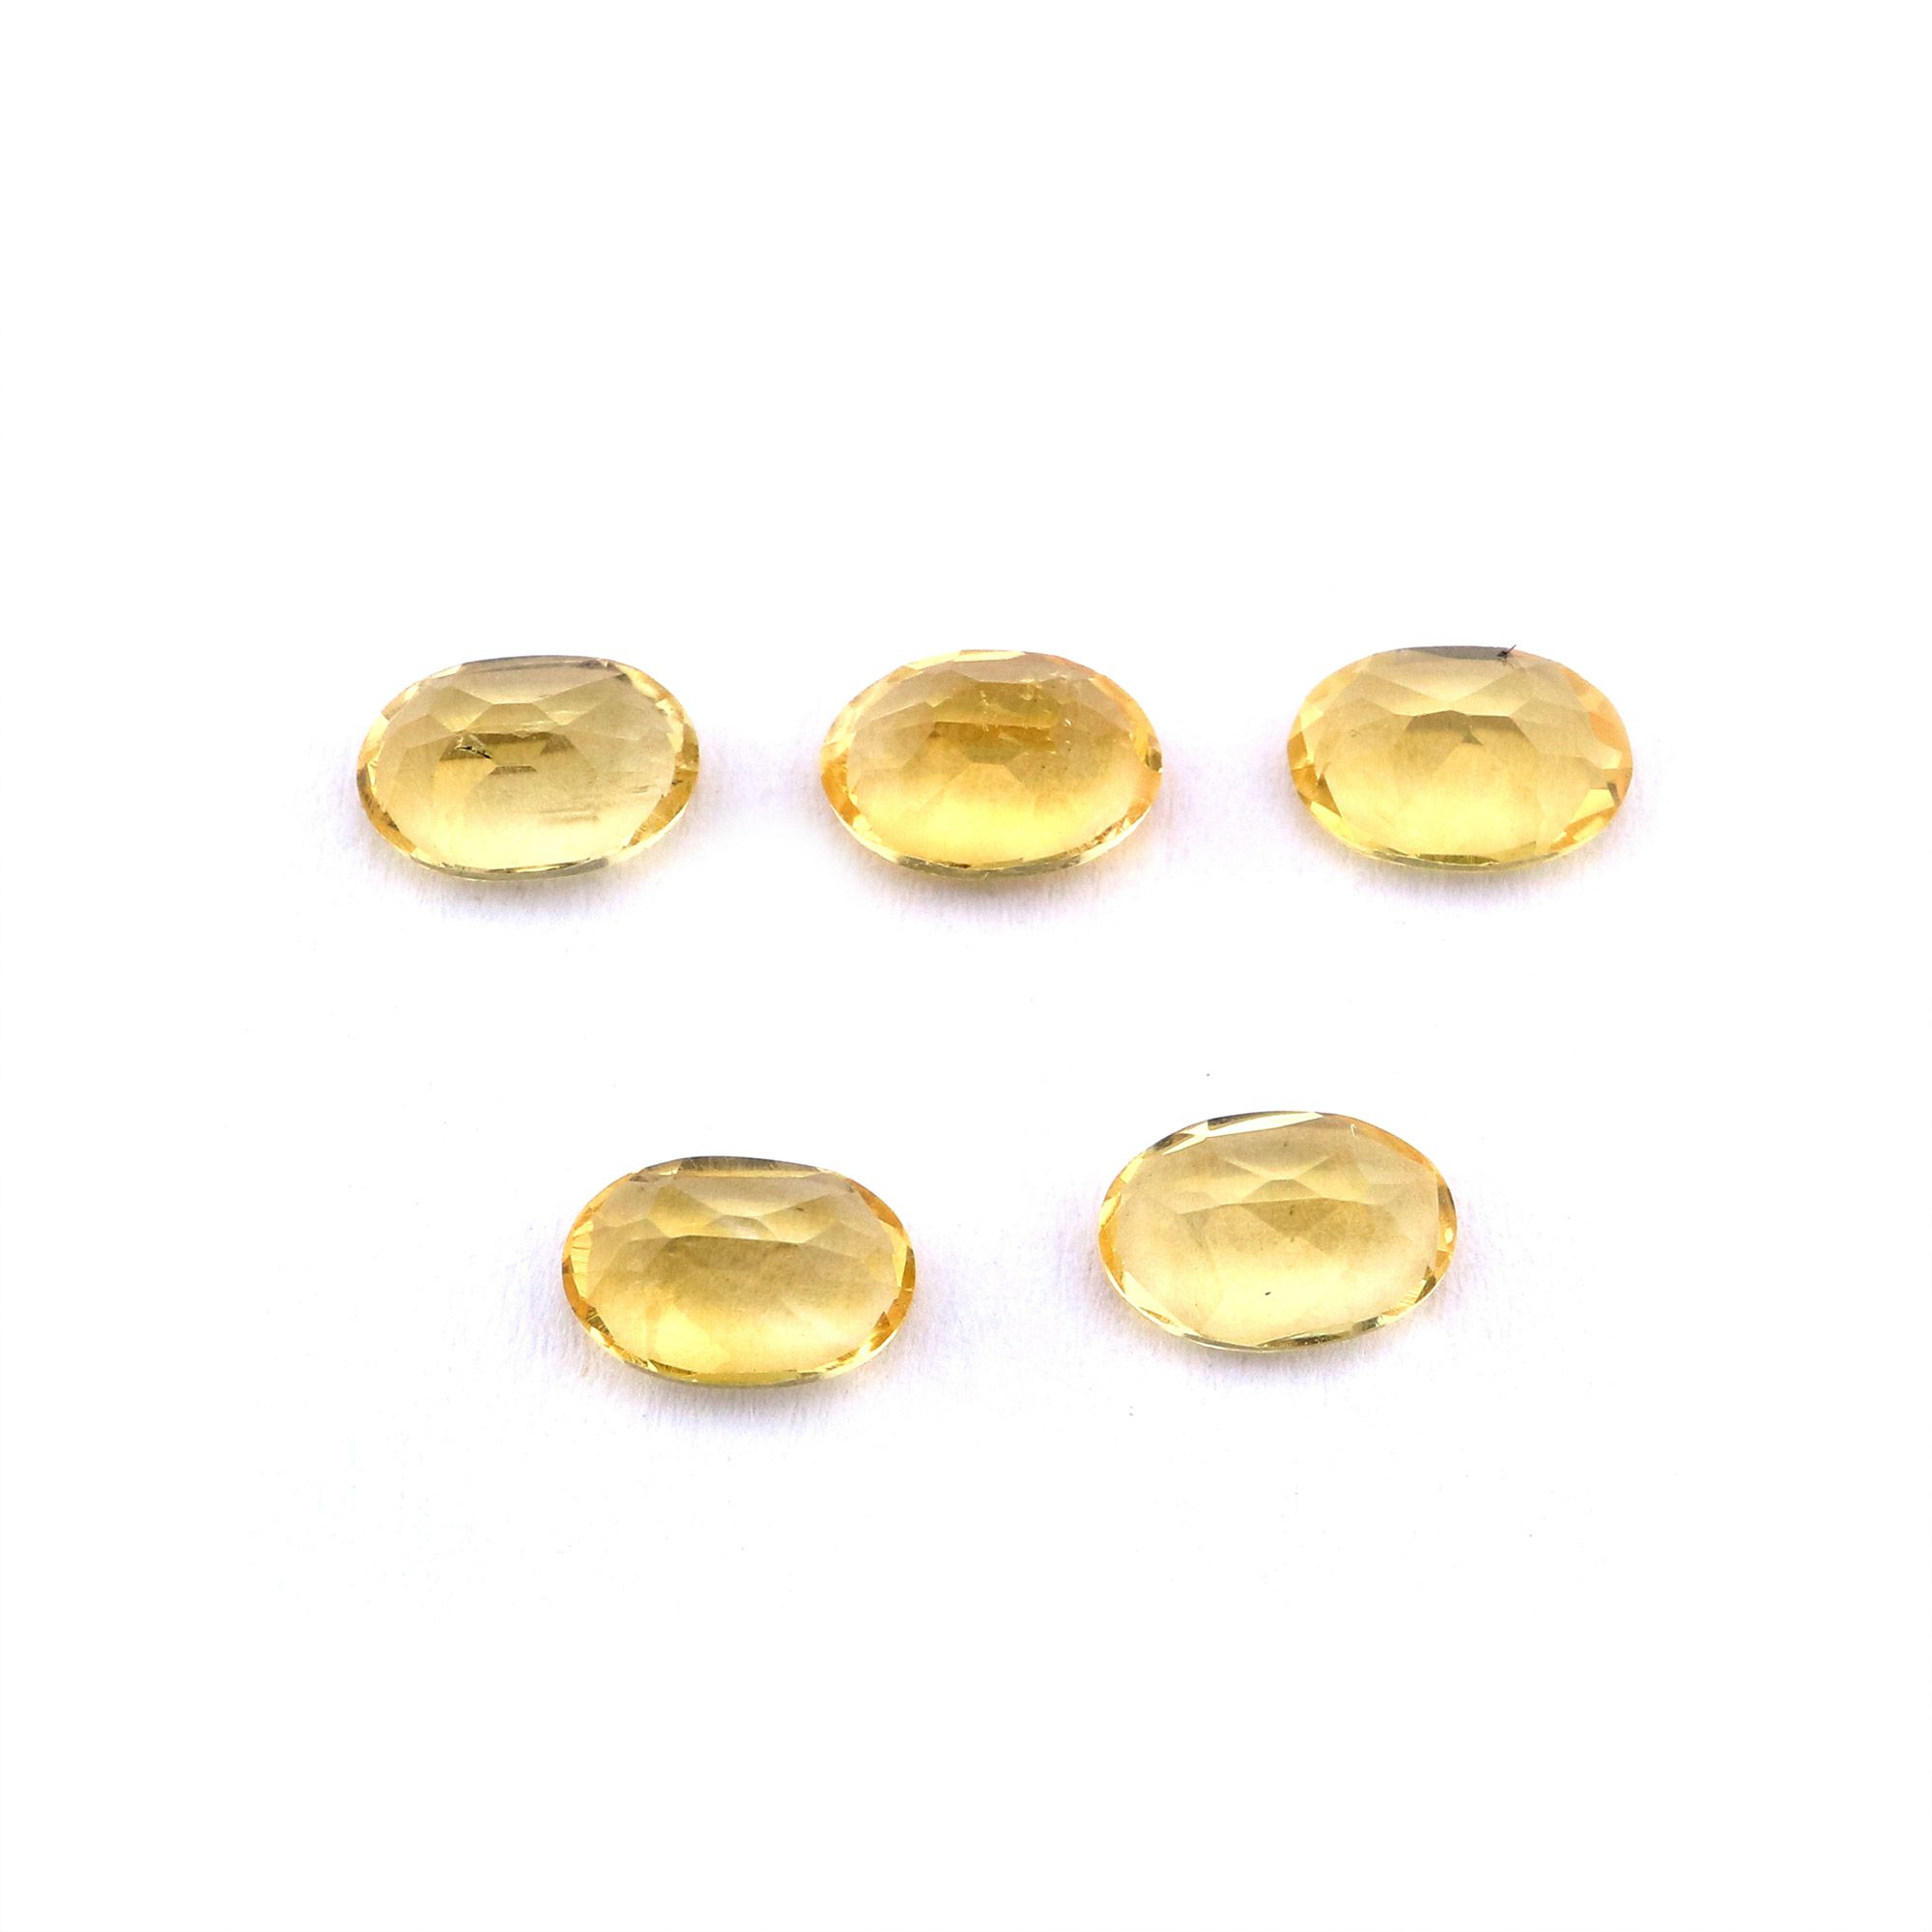 1Pcs Oval Yellow Citrine November Birthstone Faceted Cut Loose Gemstone Natural Semi Precious Stone DIY Jewelry Supplies 4120121 - Click Image to Close